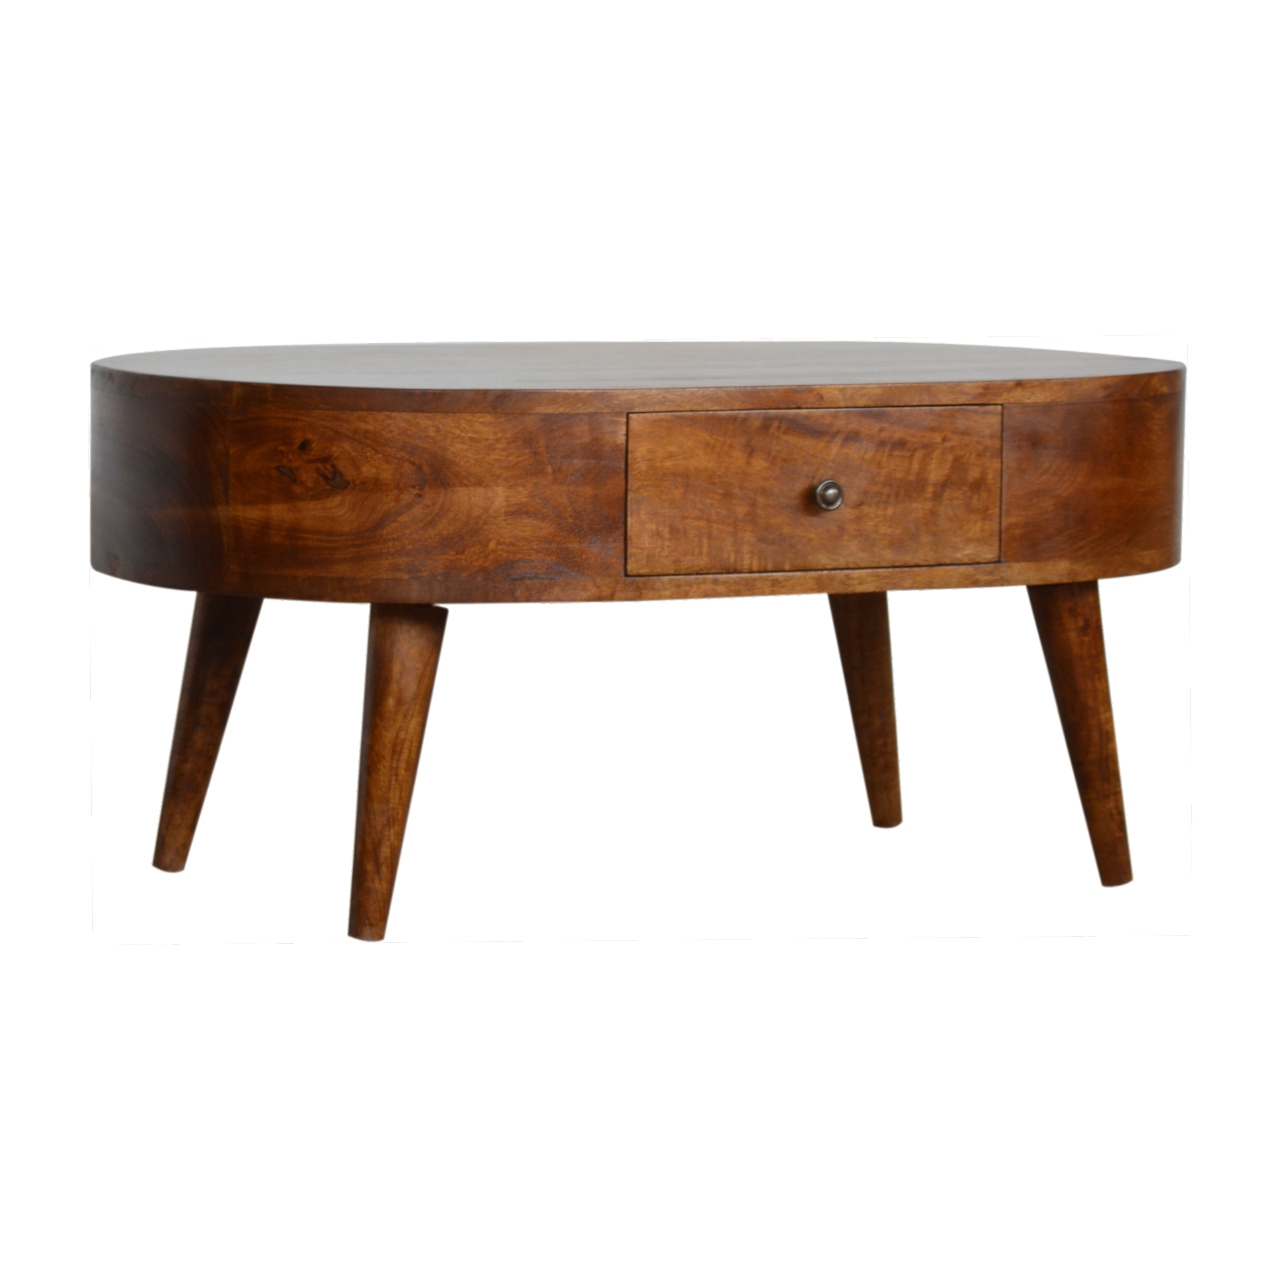 Rounded Oval Chestnut Coffee Table